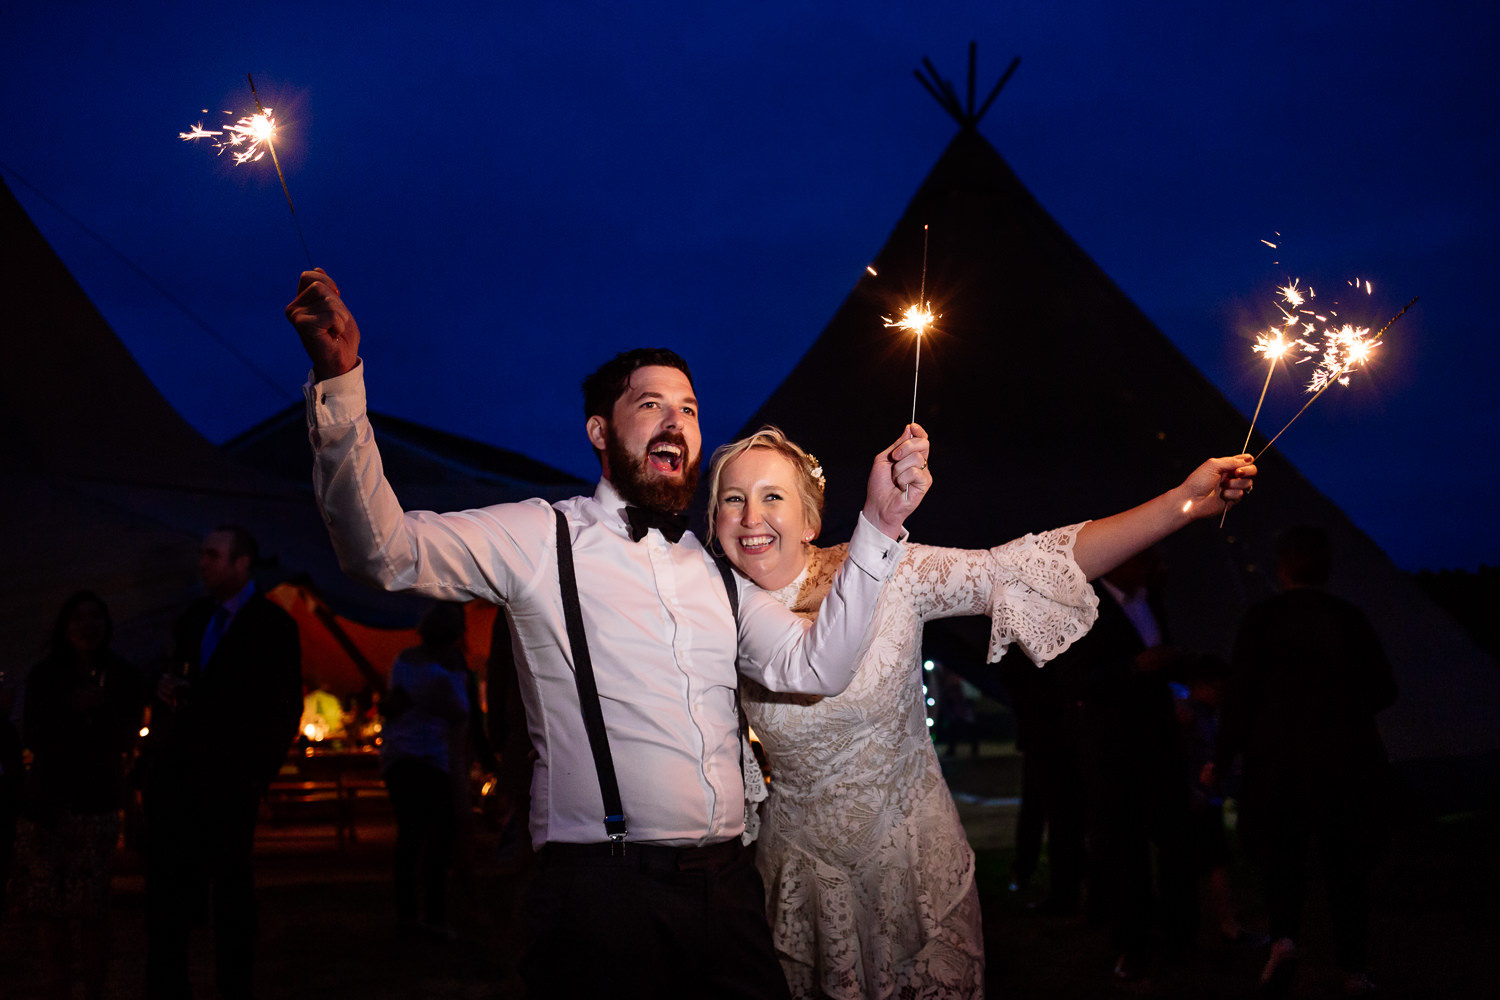 A bride and groom with sparklers in front of a tipi in Anglesey, Wales Wedding Photographer.